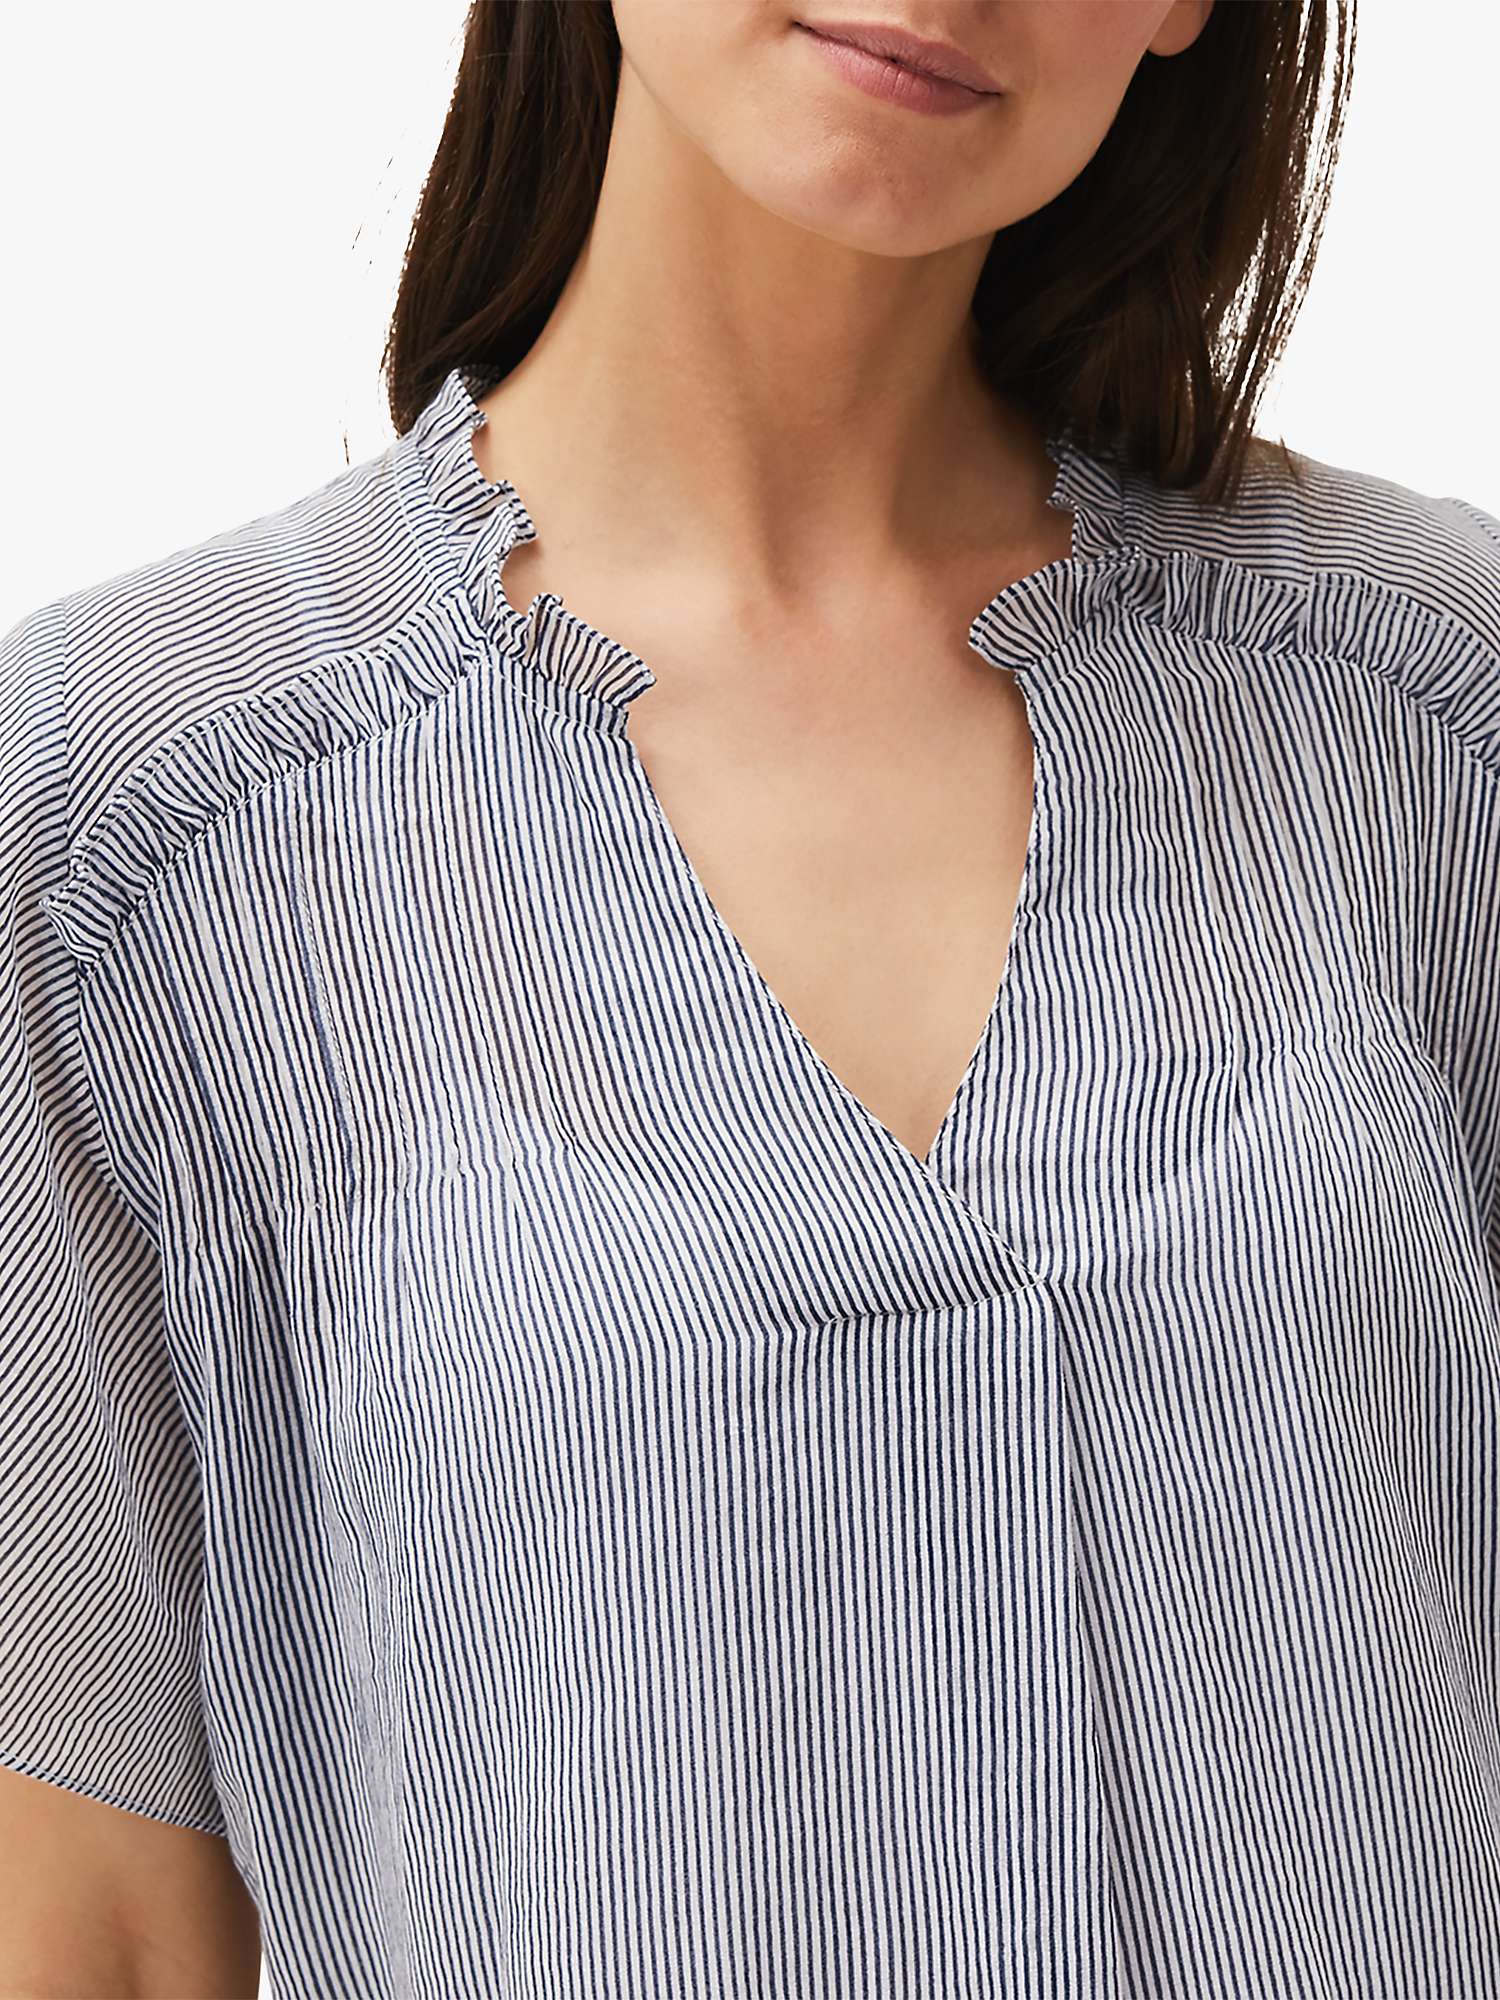 Buy Phase Eight Diya Frill Detail Striped Blouse, White/Soft Blue Online at johnlewis.com